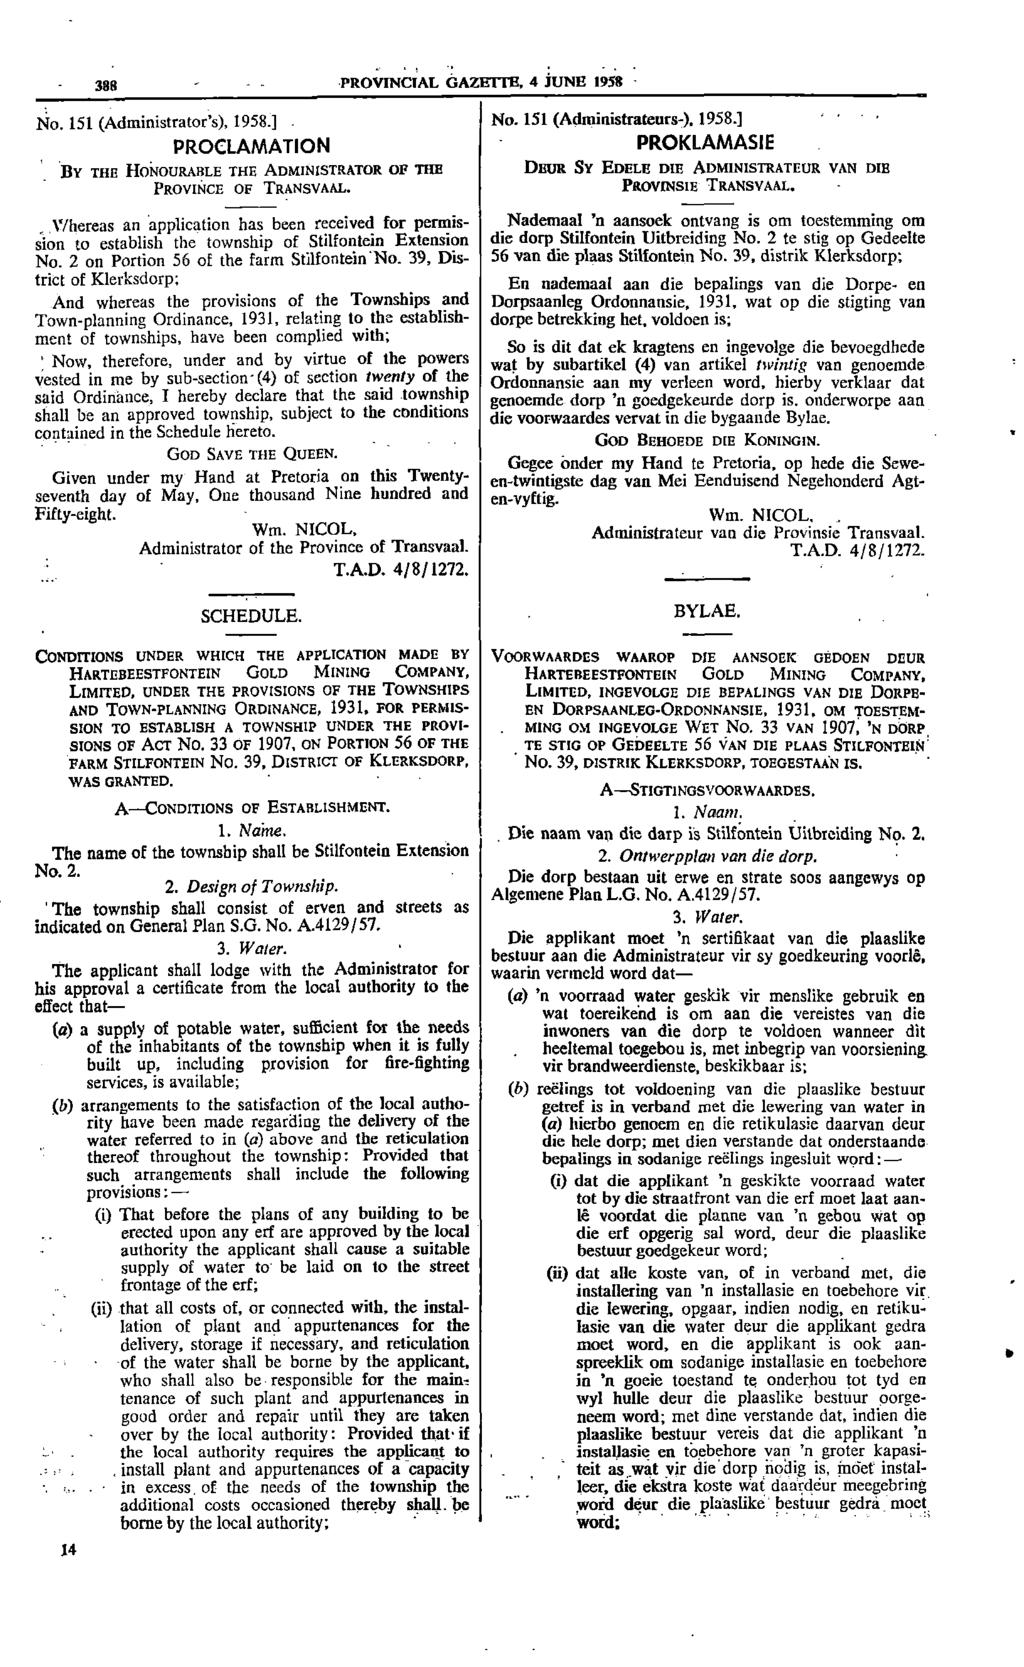 388 PROVINCIAL GAZIBI Ili 4 JUNE 1958 No 151 (Administrators) 1958] No 151 (Administrateurs) 1958] PROCLAMATION PROKLAMASIE BY THE HONOURABLE THE ADMINISTRATOR OF THE DEUR SY EDELE DIE ADMINISTRATEUR